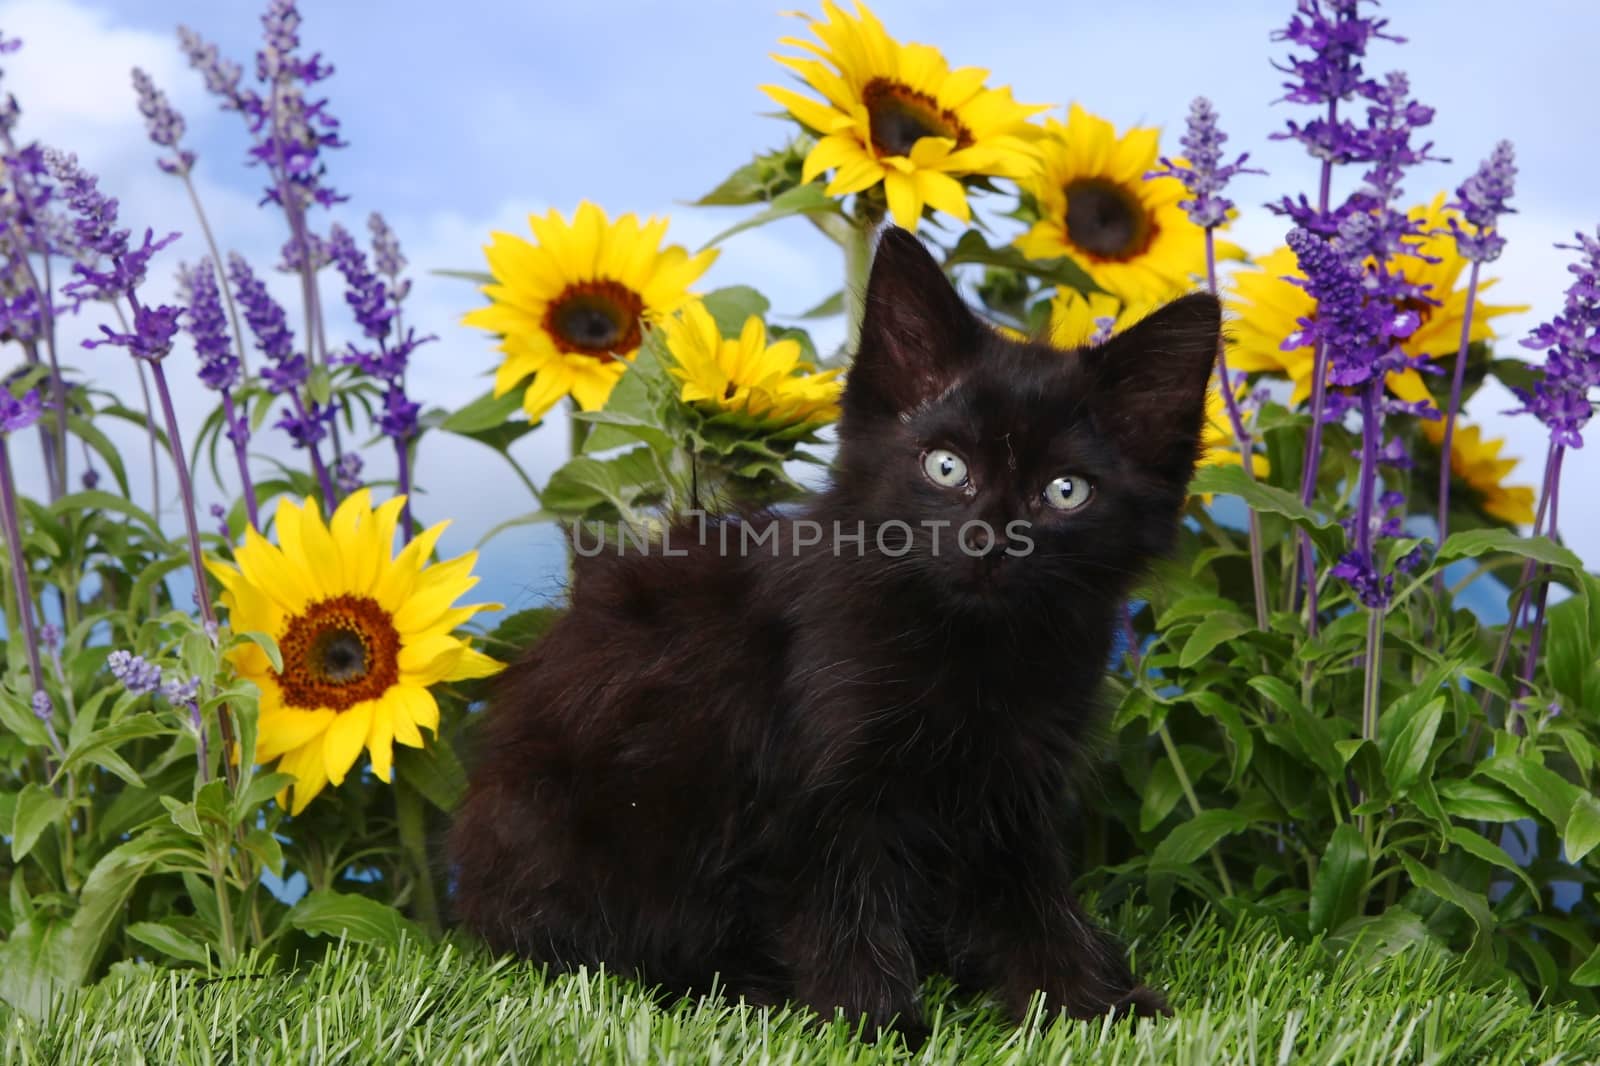 Black Kitten in the Garden With Sunflowers and Salvia